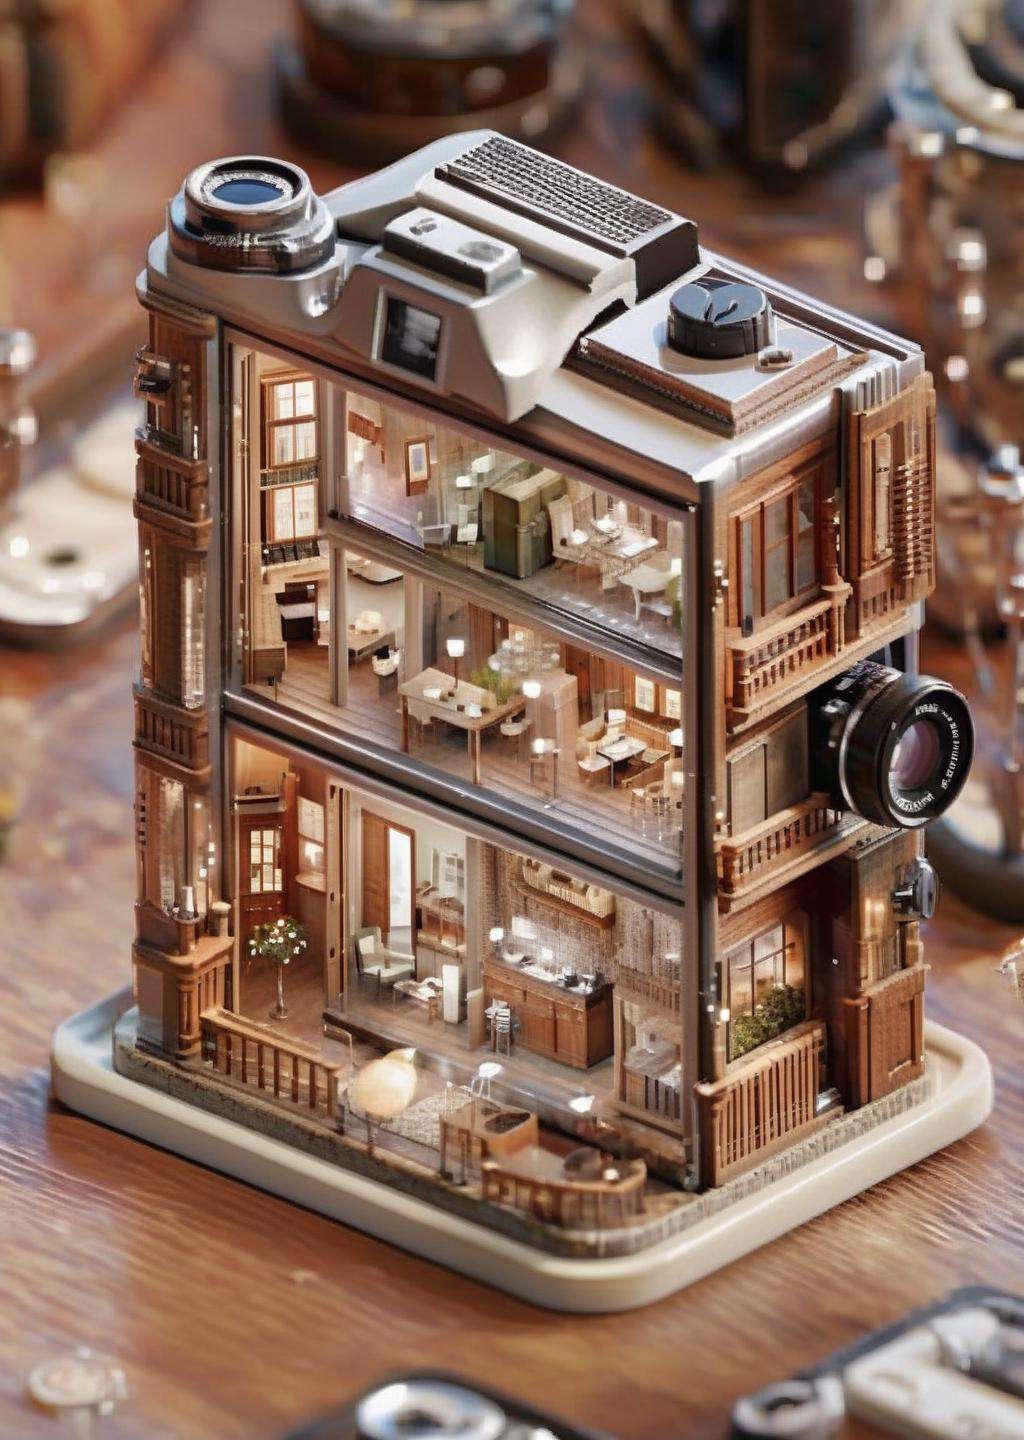 a miniature of a model of a house inside a The sensor of a digital camera captures light's delicate ballet, turning moments into a microcosm of memories. , incredibly detailed, a microscopic photo, photorealism<lora:Microverse_Creator_sdxl:1.0>